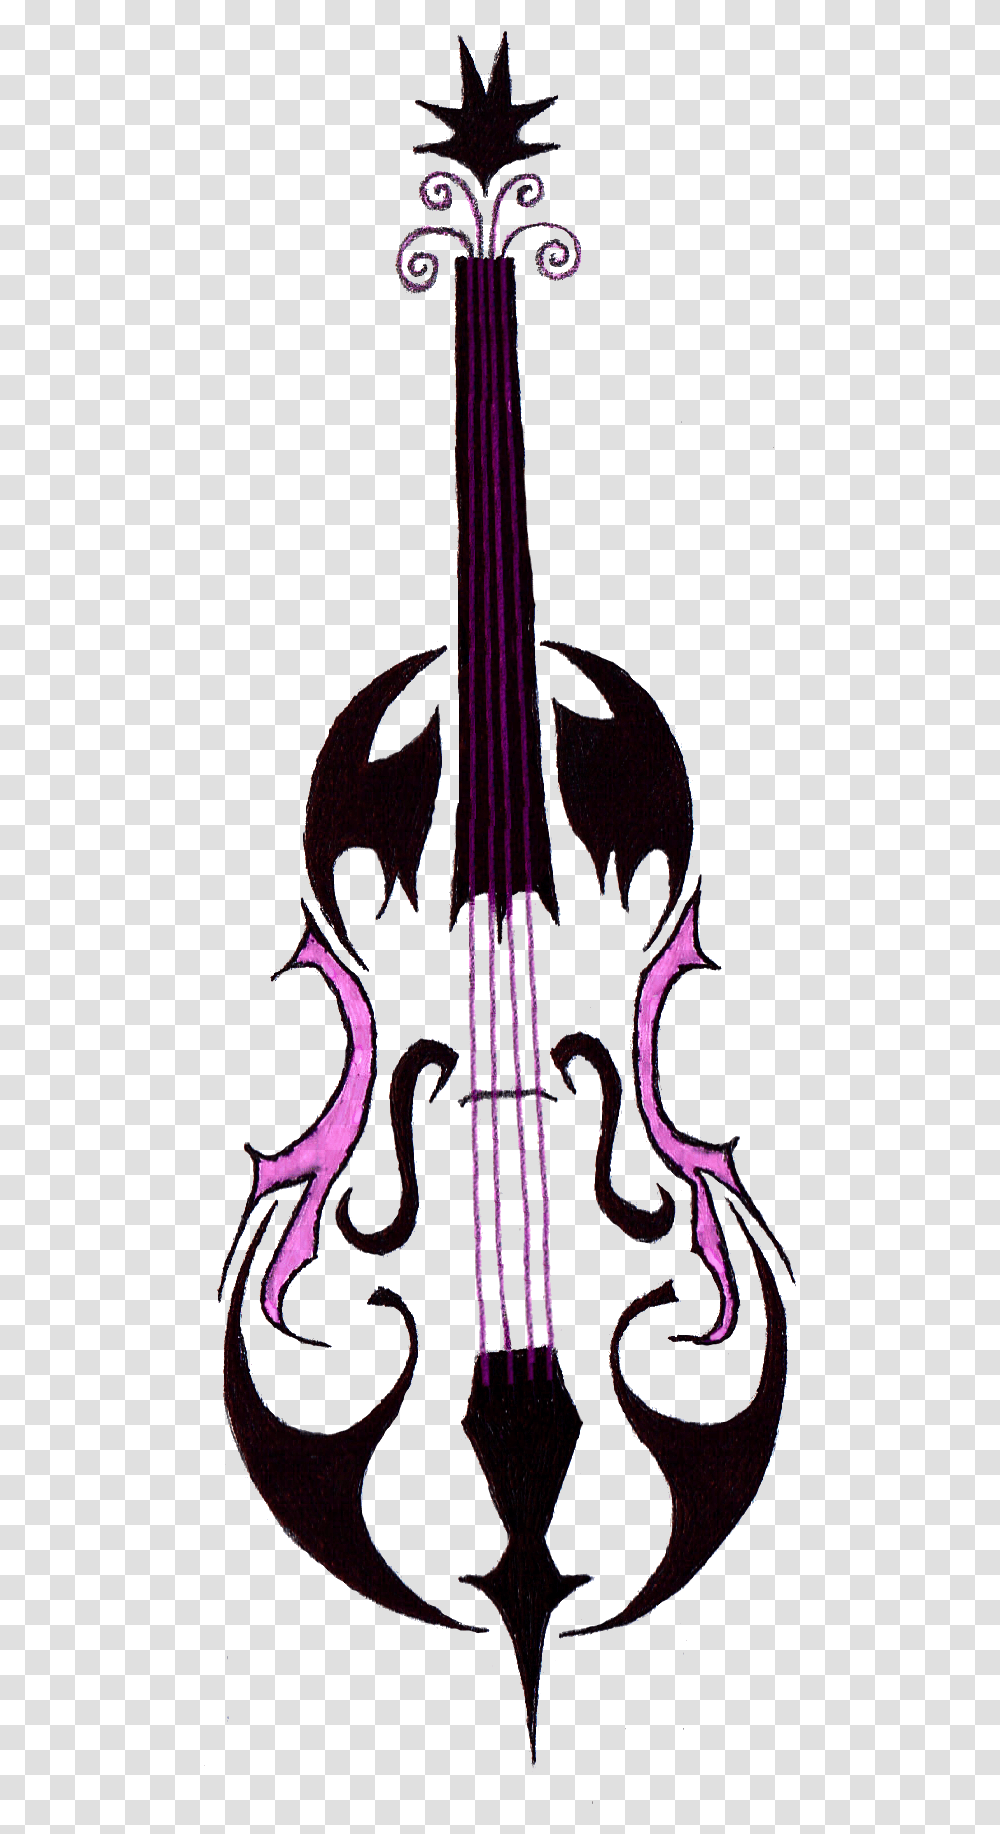 Fiddle Drawing Tribal Clipart Free Tribal Cello Tattoo, Leisure Activities, Guitar, Musical Instrument, Violin Transparent Png